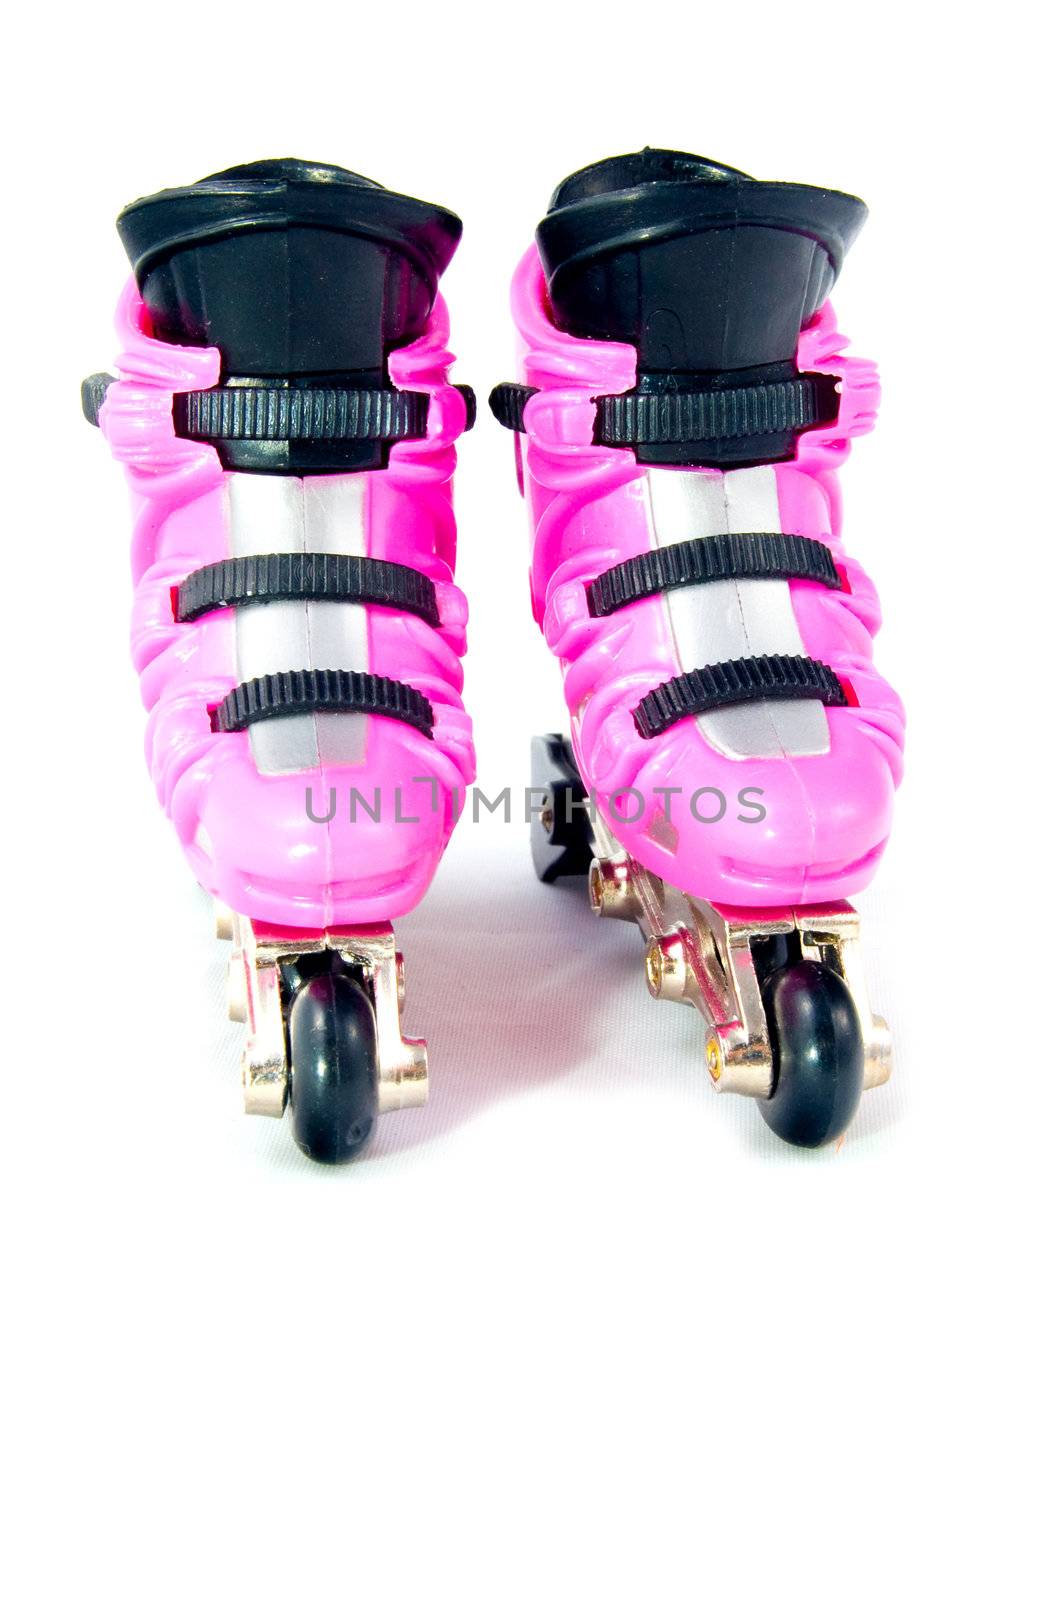 font view of two pink rollerscates isolated on a white background